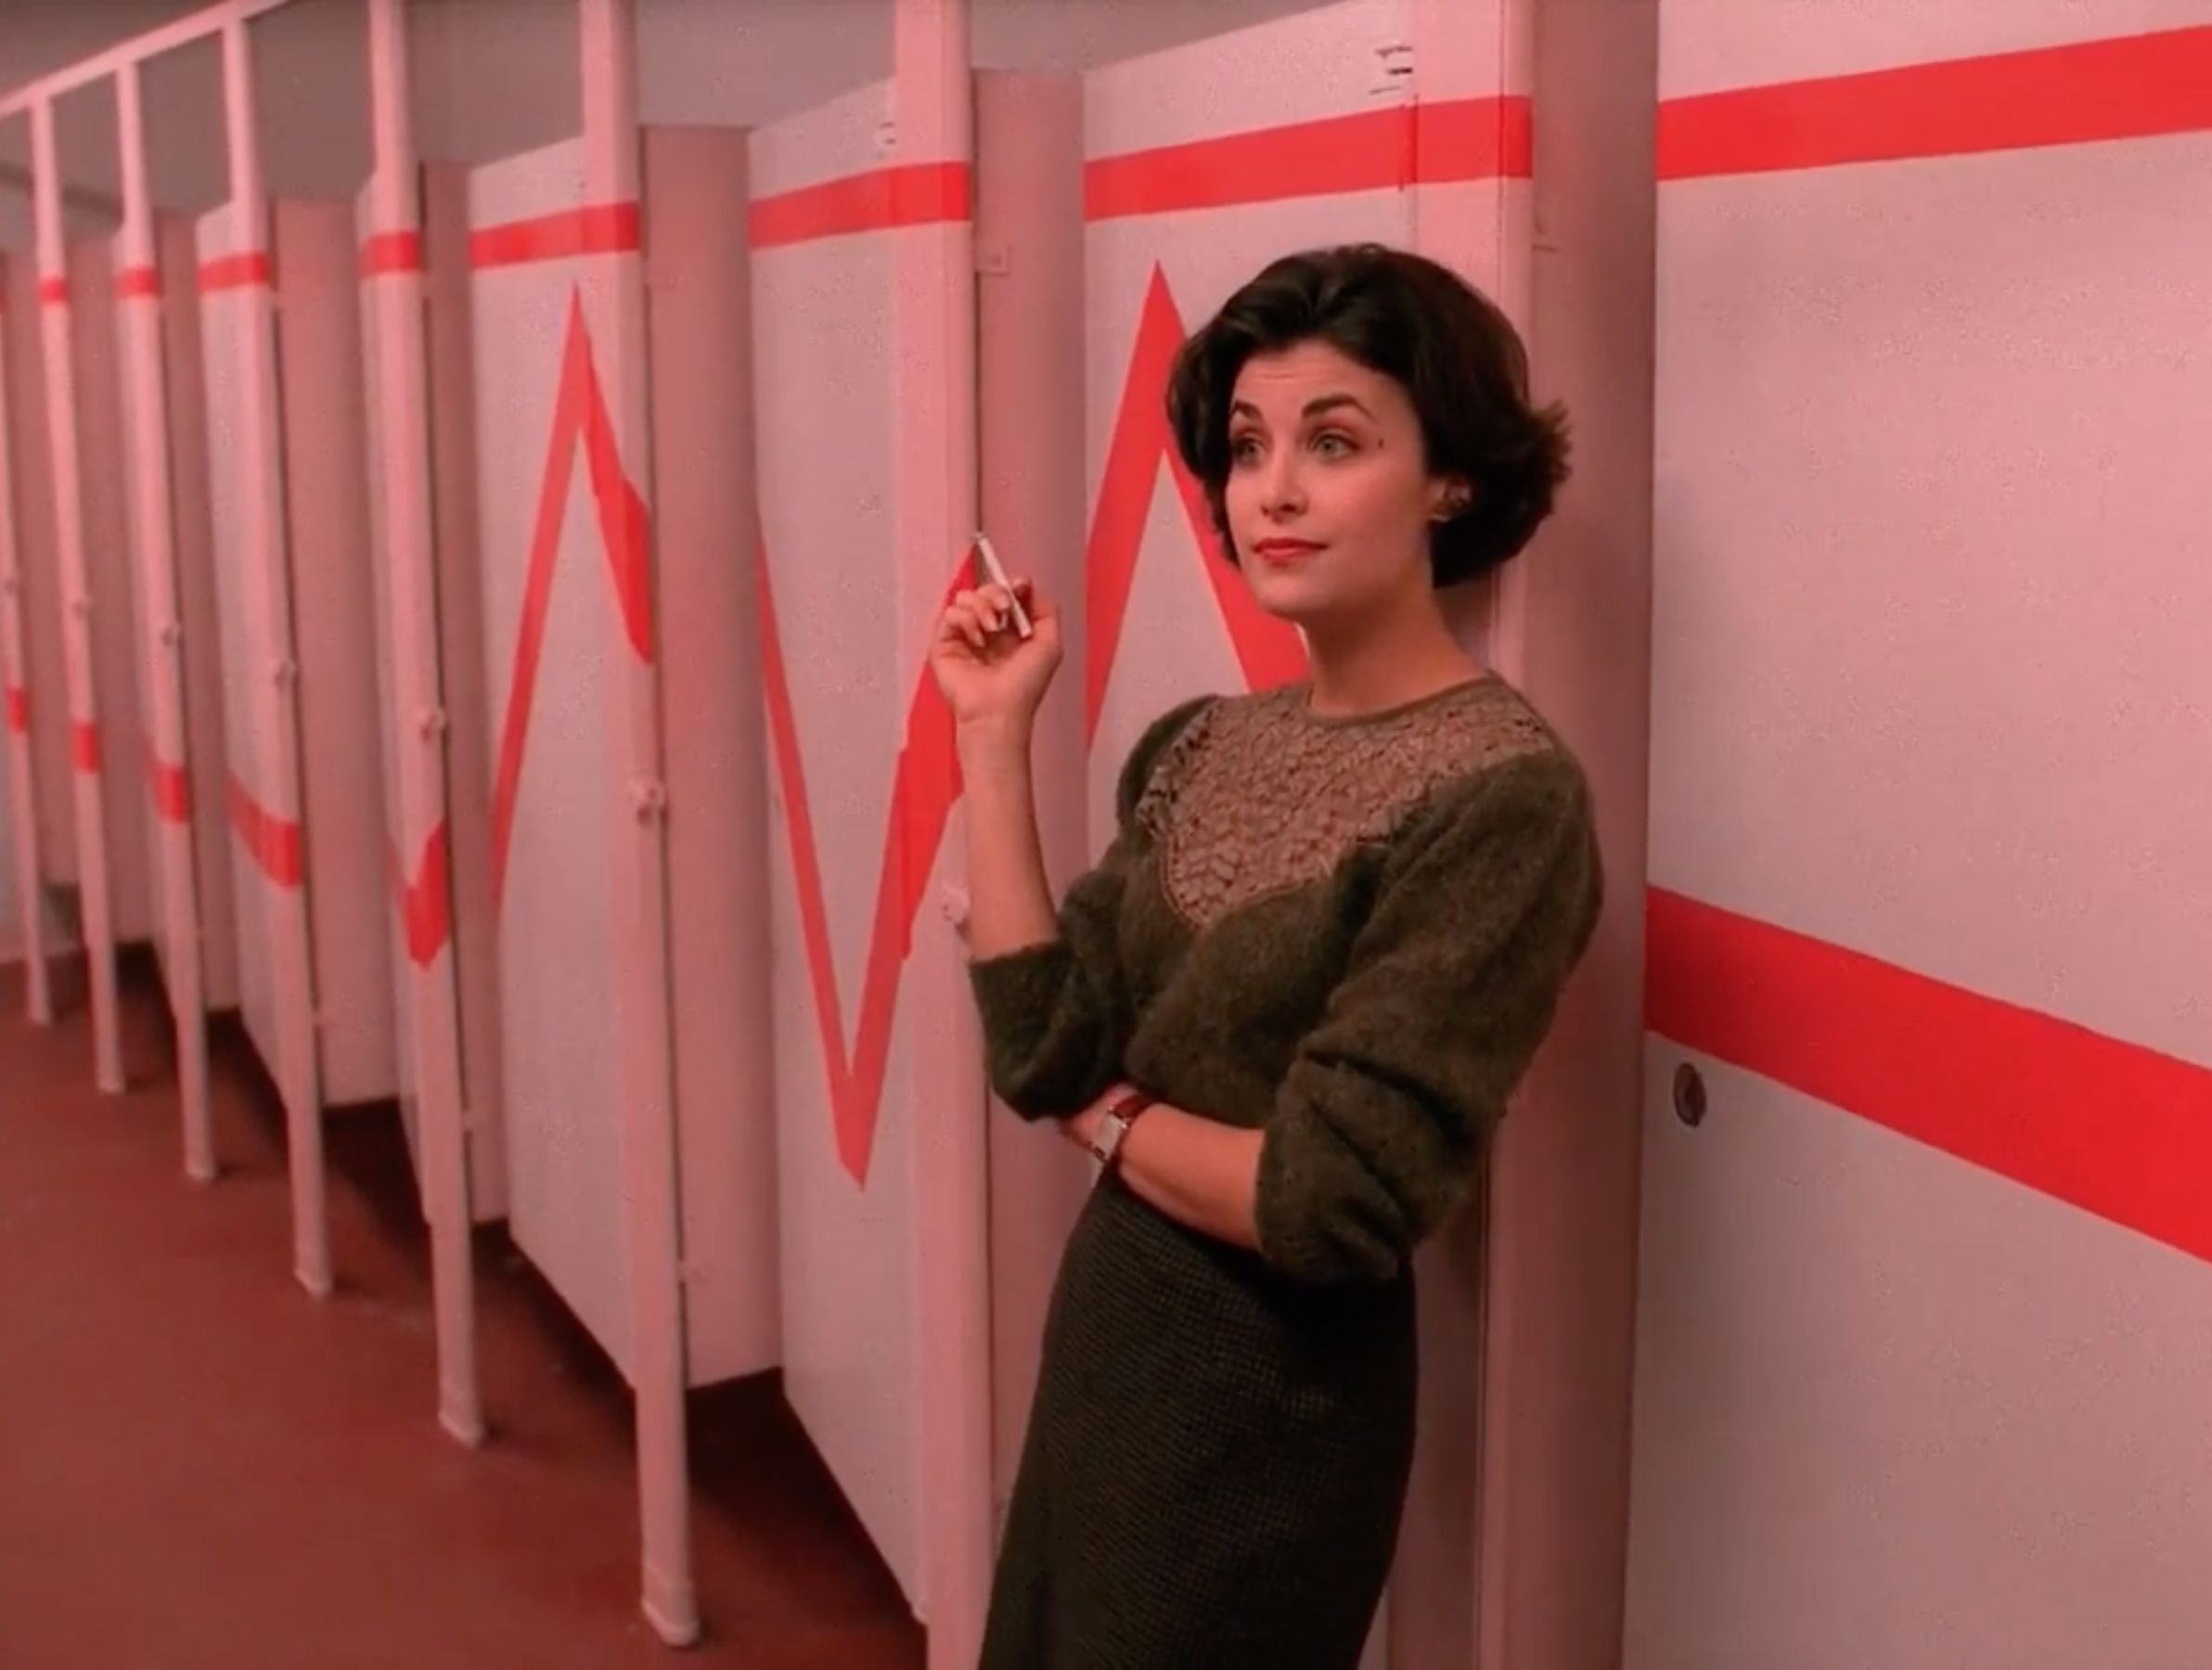 Remember when the women of Twin Peaks made nostalgia new again?